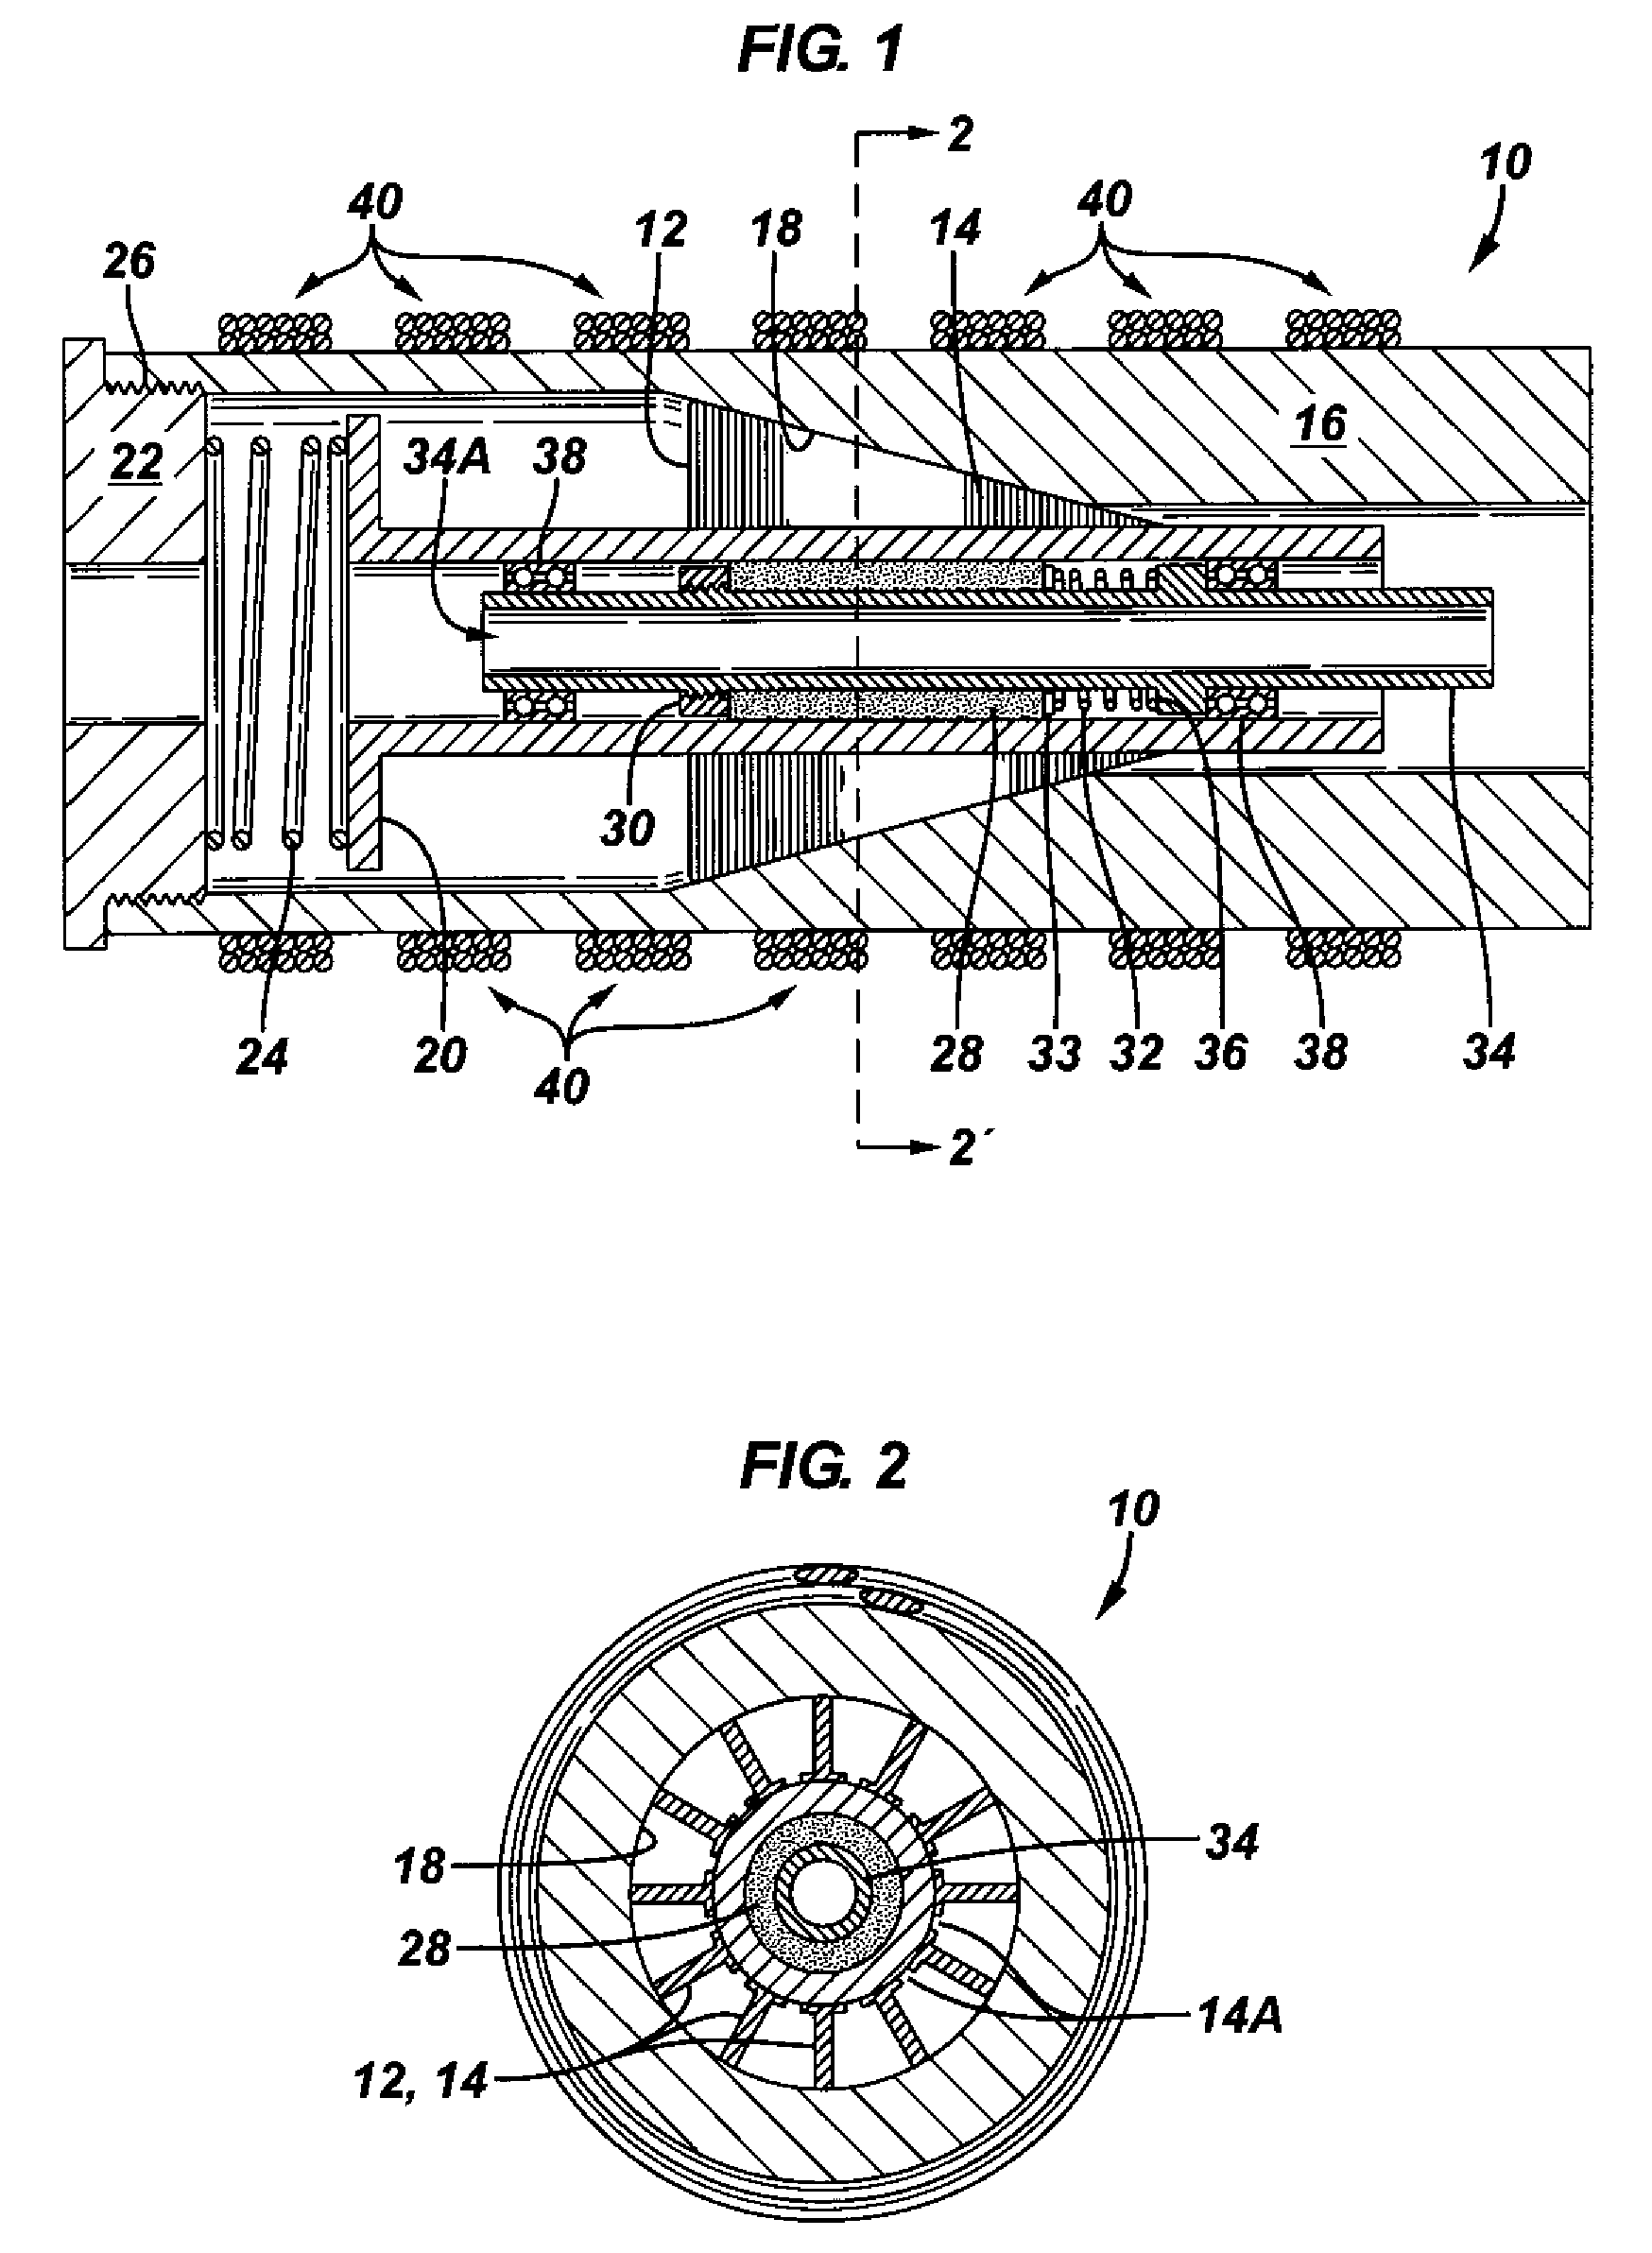 Linear actuator using magnetostrictive power element